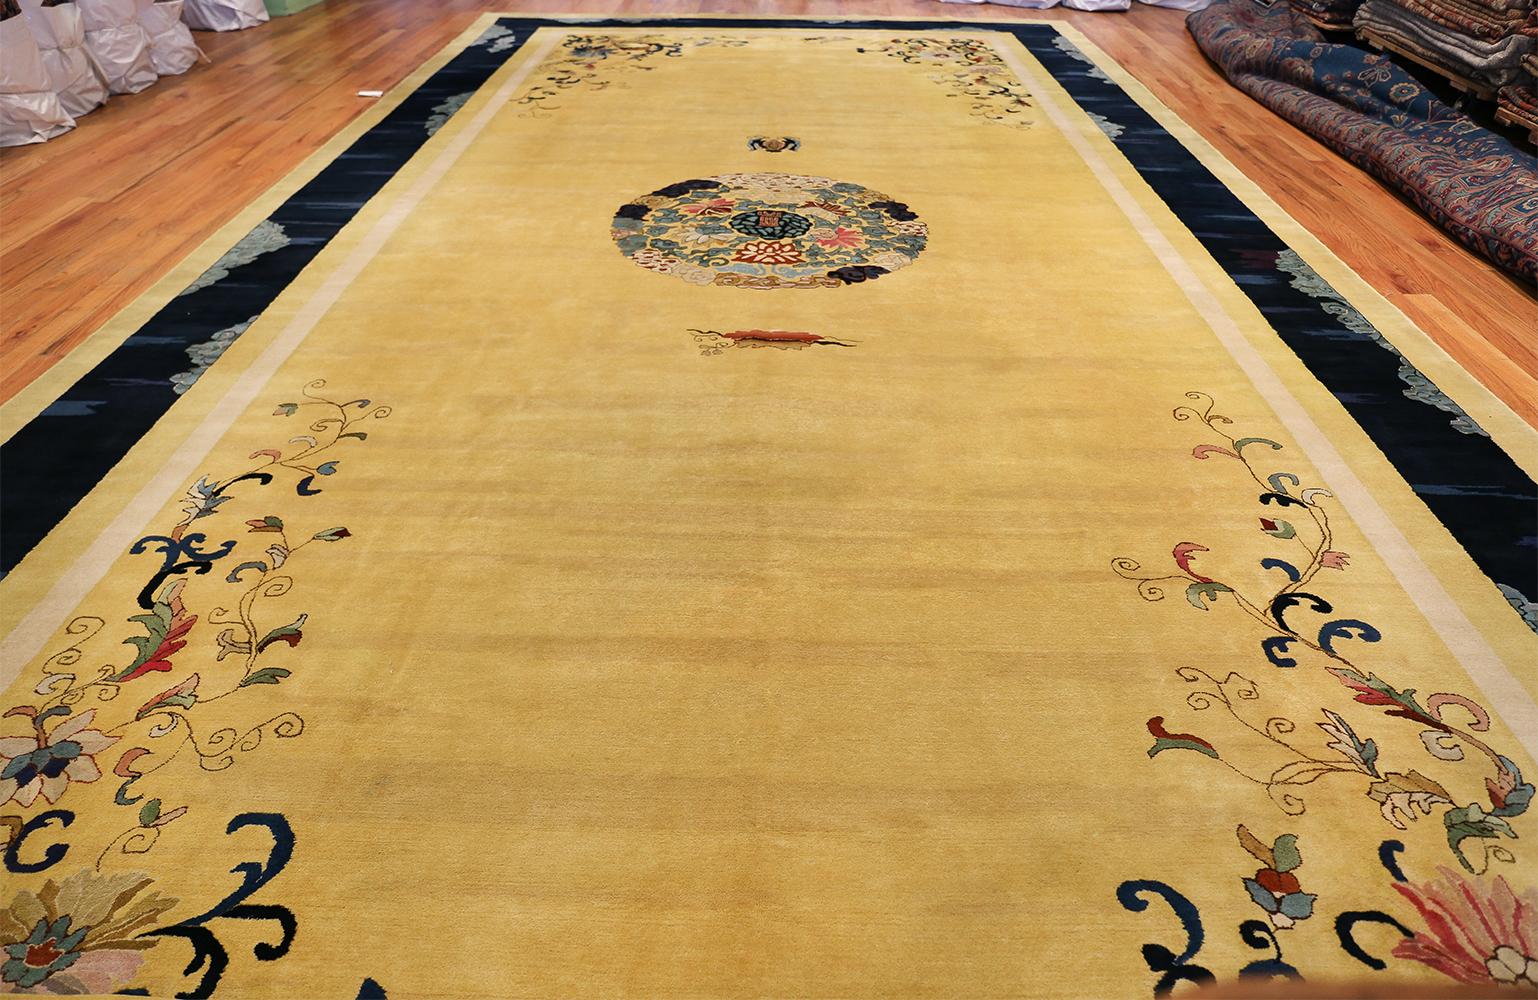 Magnificent saffron yellow oversize antique Chinese rug, country of origin / rug type: China rug, circa 1920. Size: 11 ft 3 in x 22 ft 6 in (3.43 m x 6.86 m)

